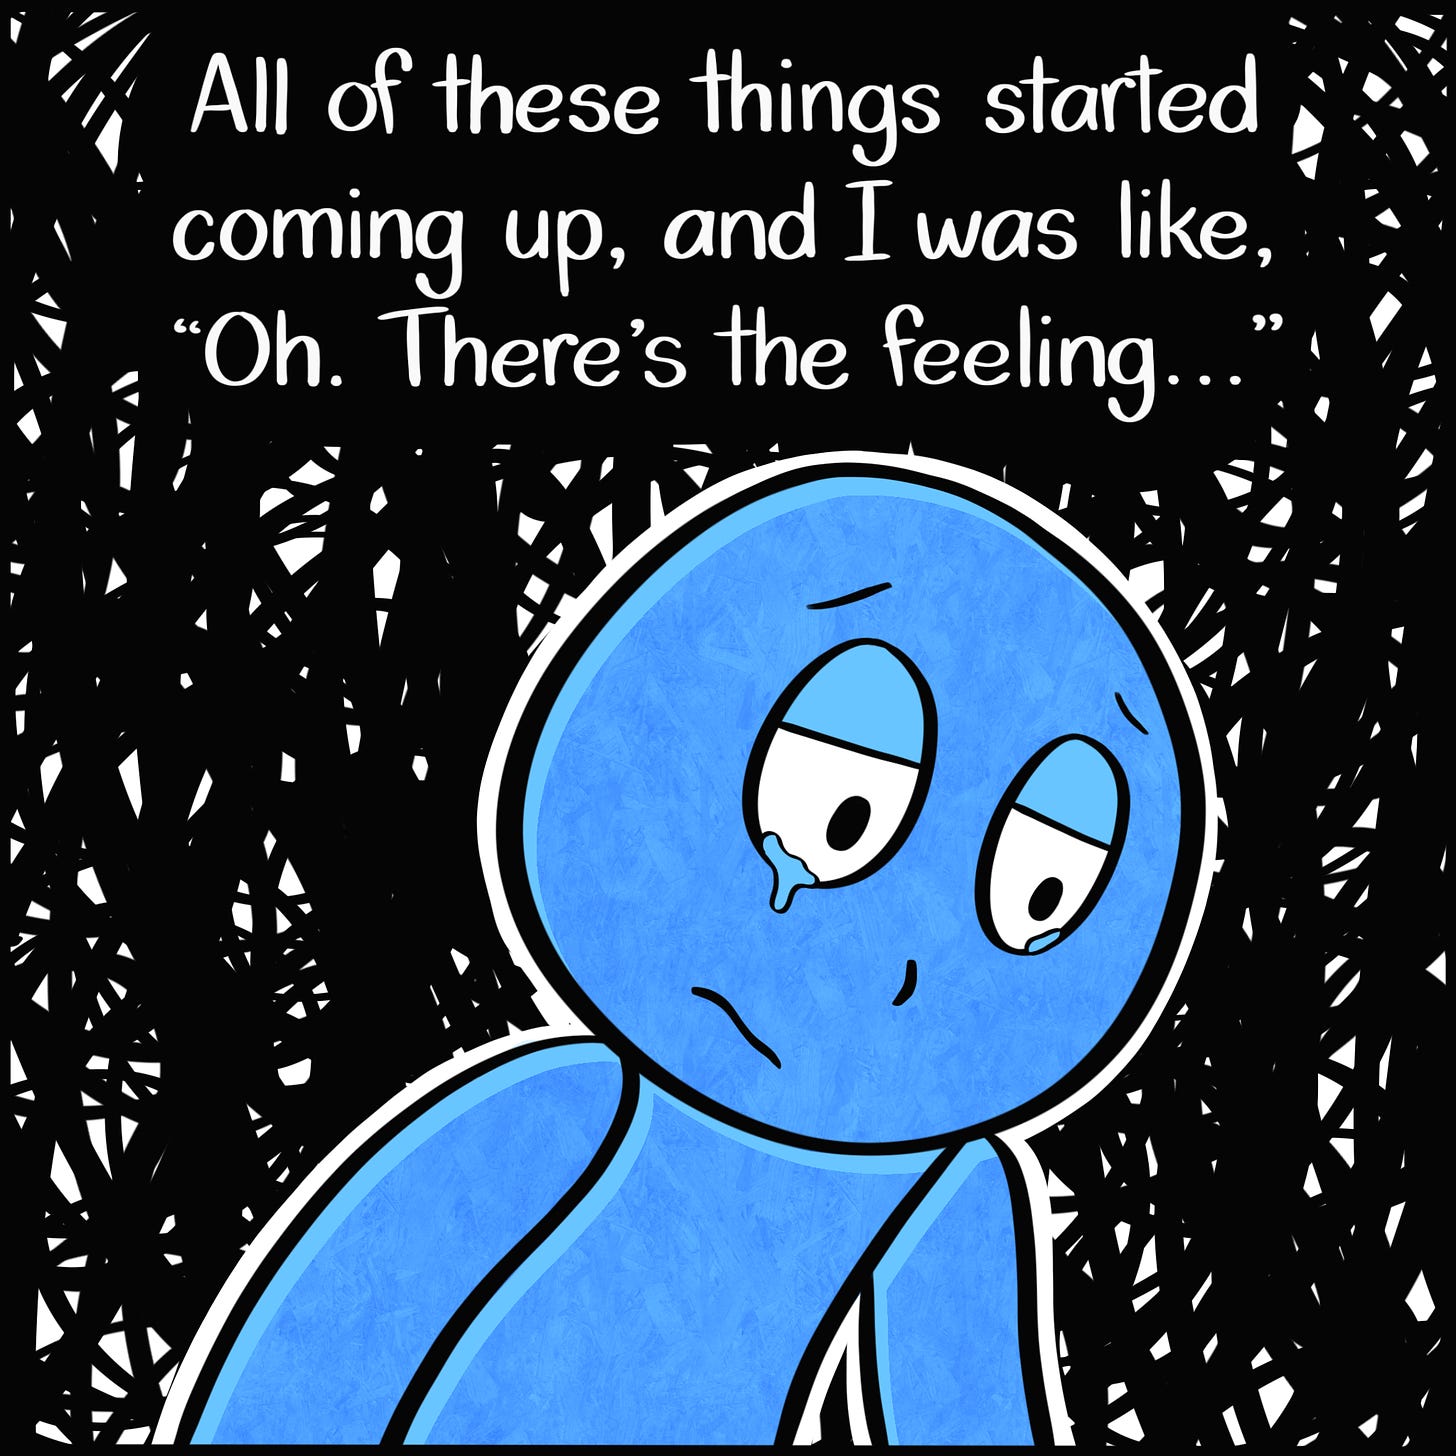 Caption: All of these things started coming up, and I was like, "Oh. There's the feeling..." Image: Close up of the Blue Person with tears in their eyes. The dark, condensed scribbles make up the background.